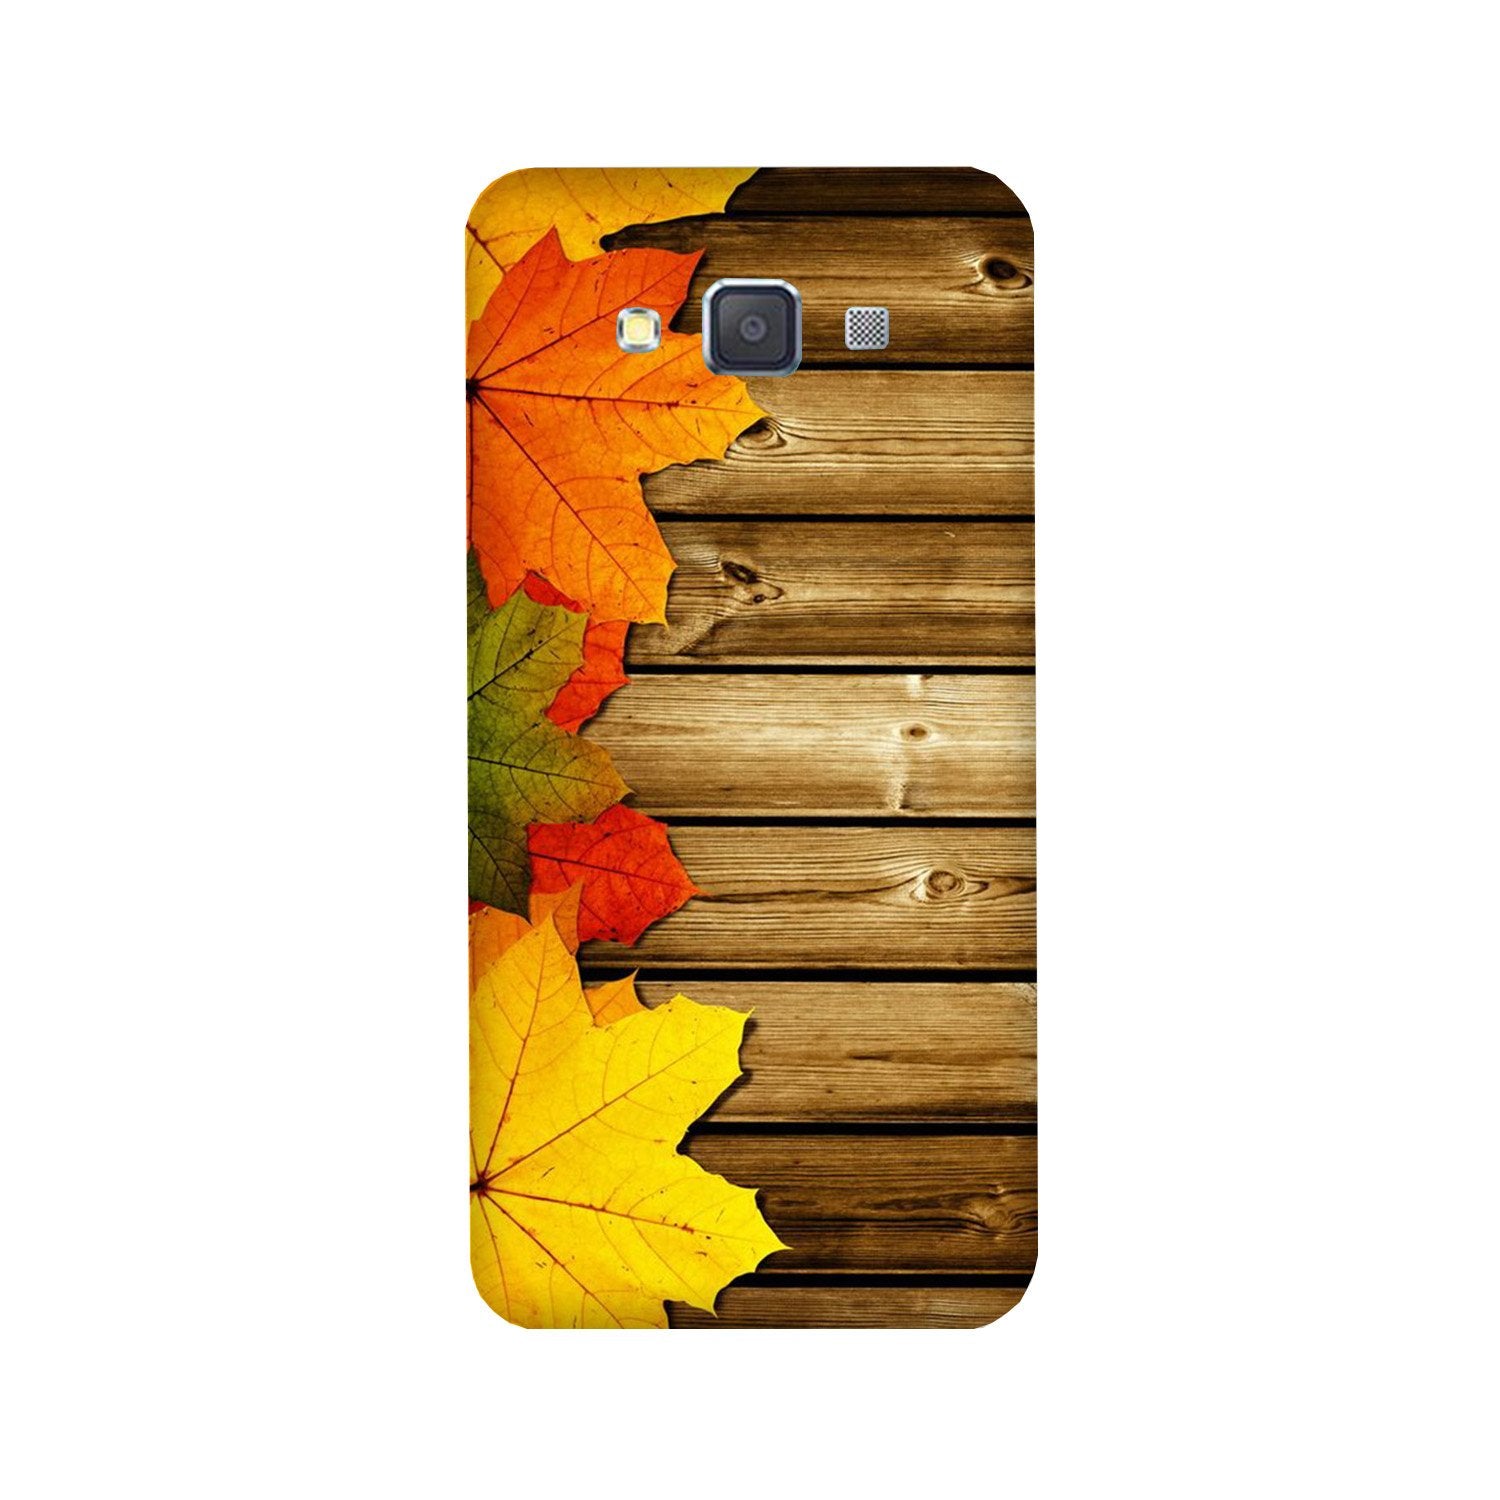 Wooden look3 Case for Galaxy ON7/ON7 Pro